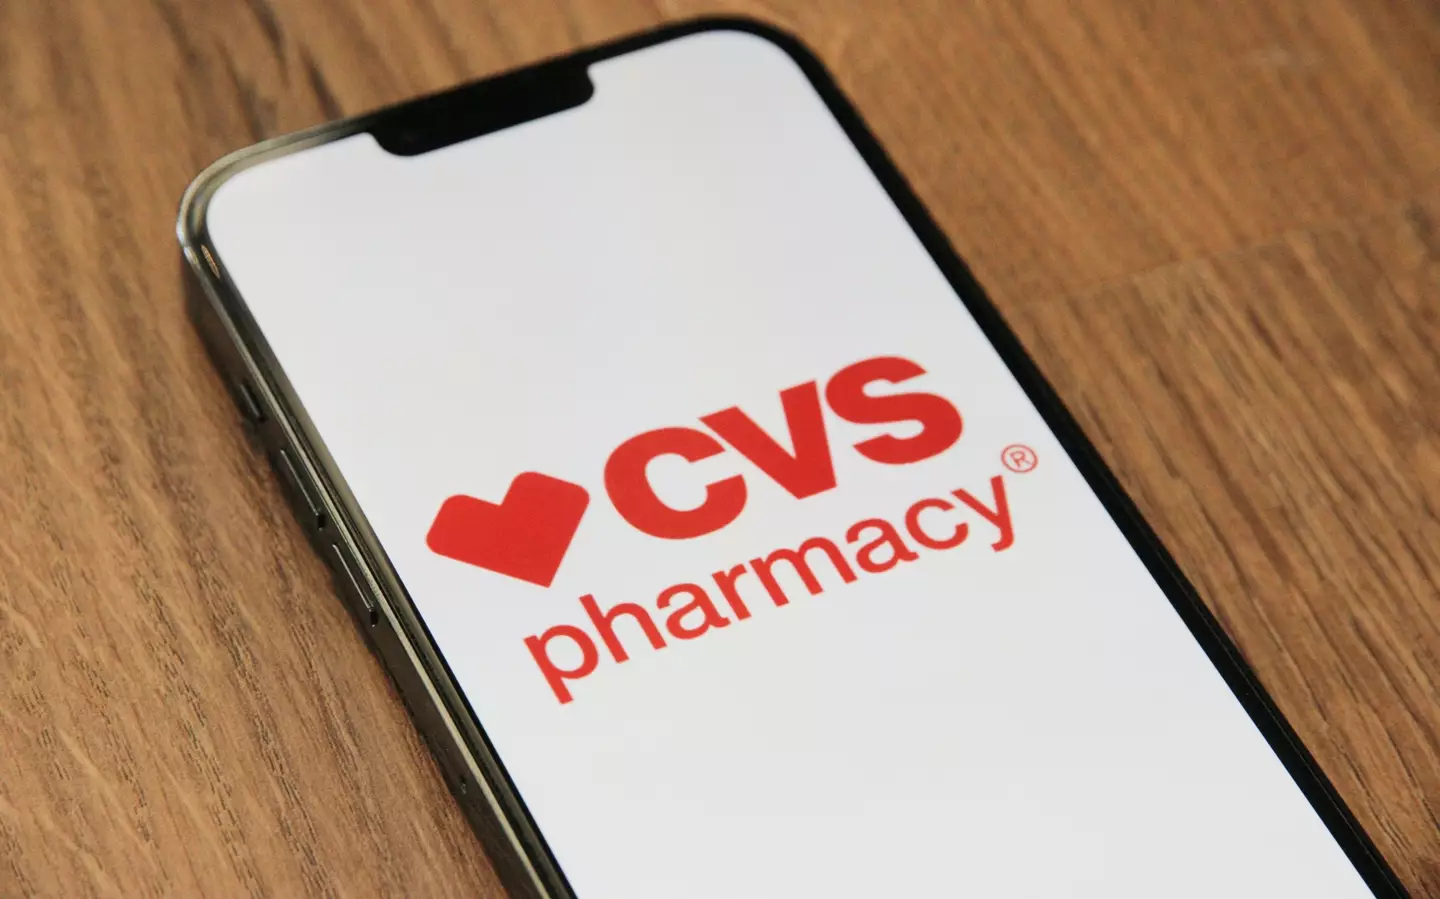 People are just finding out what CVS stands for.